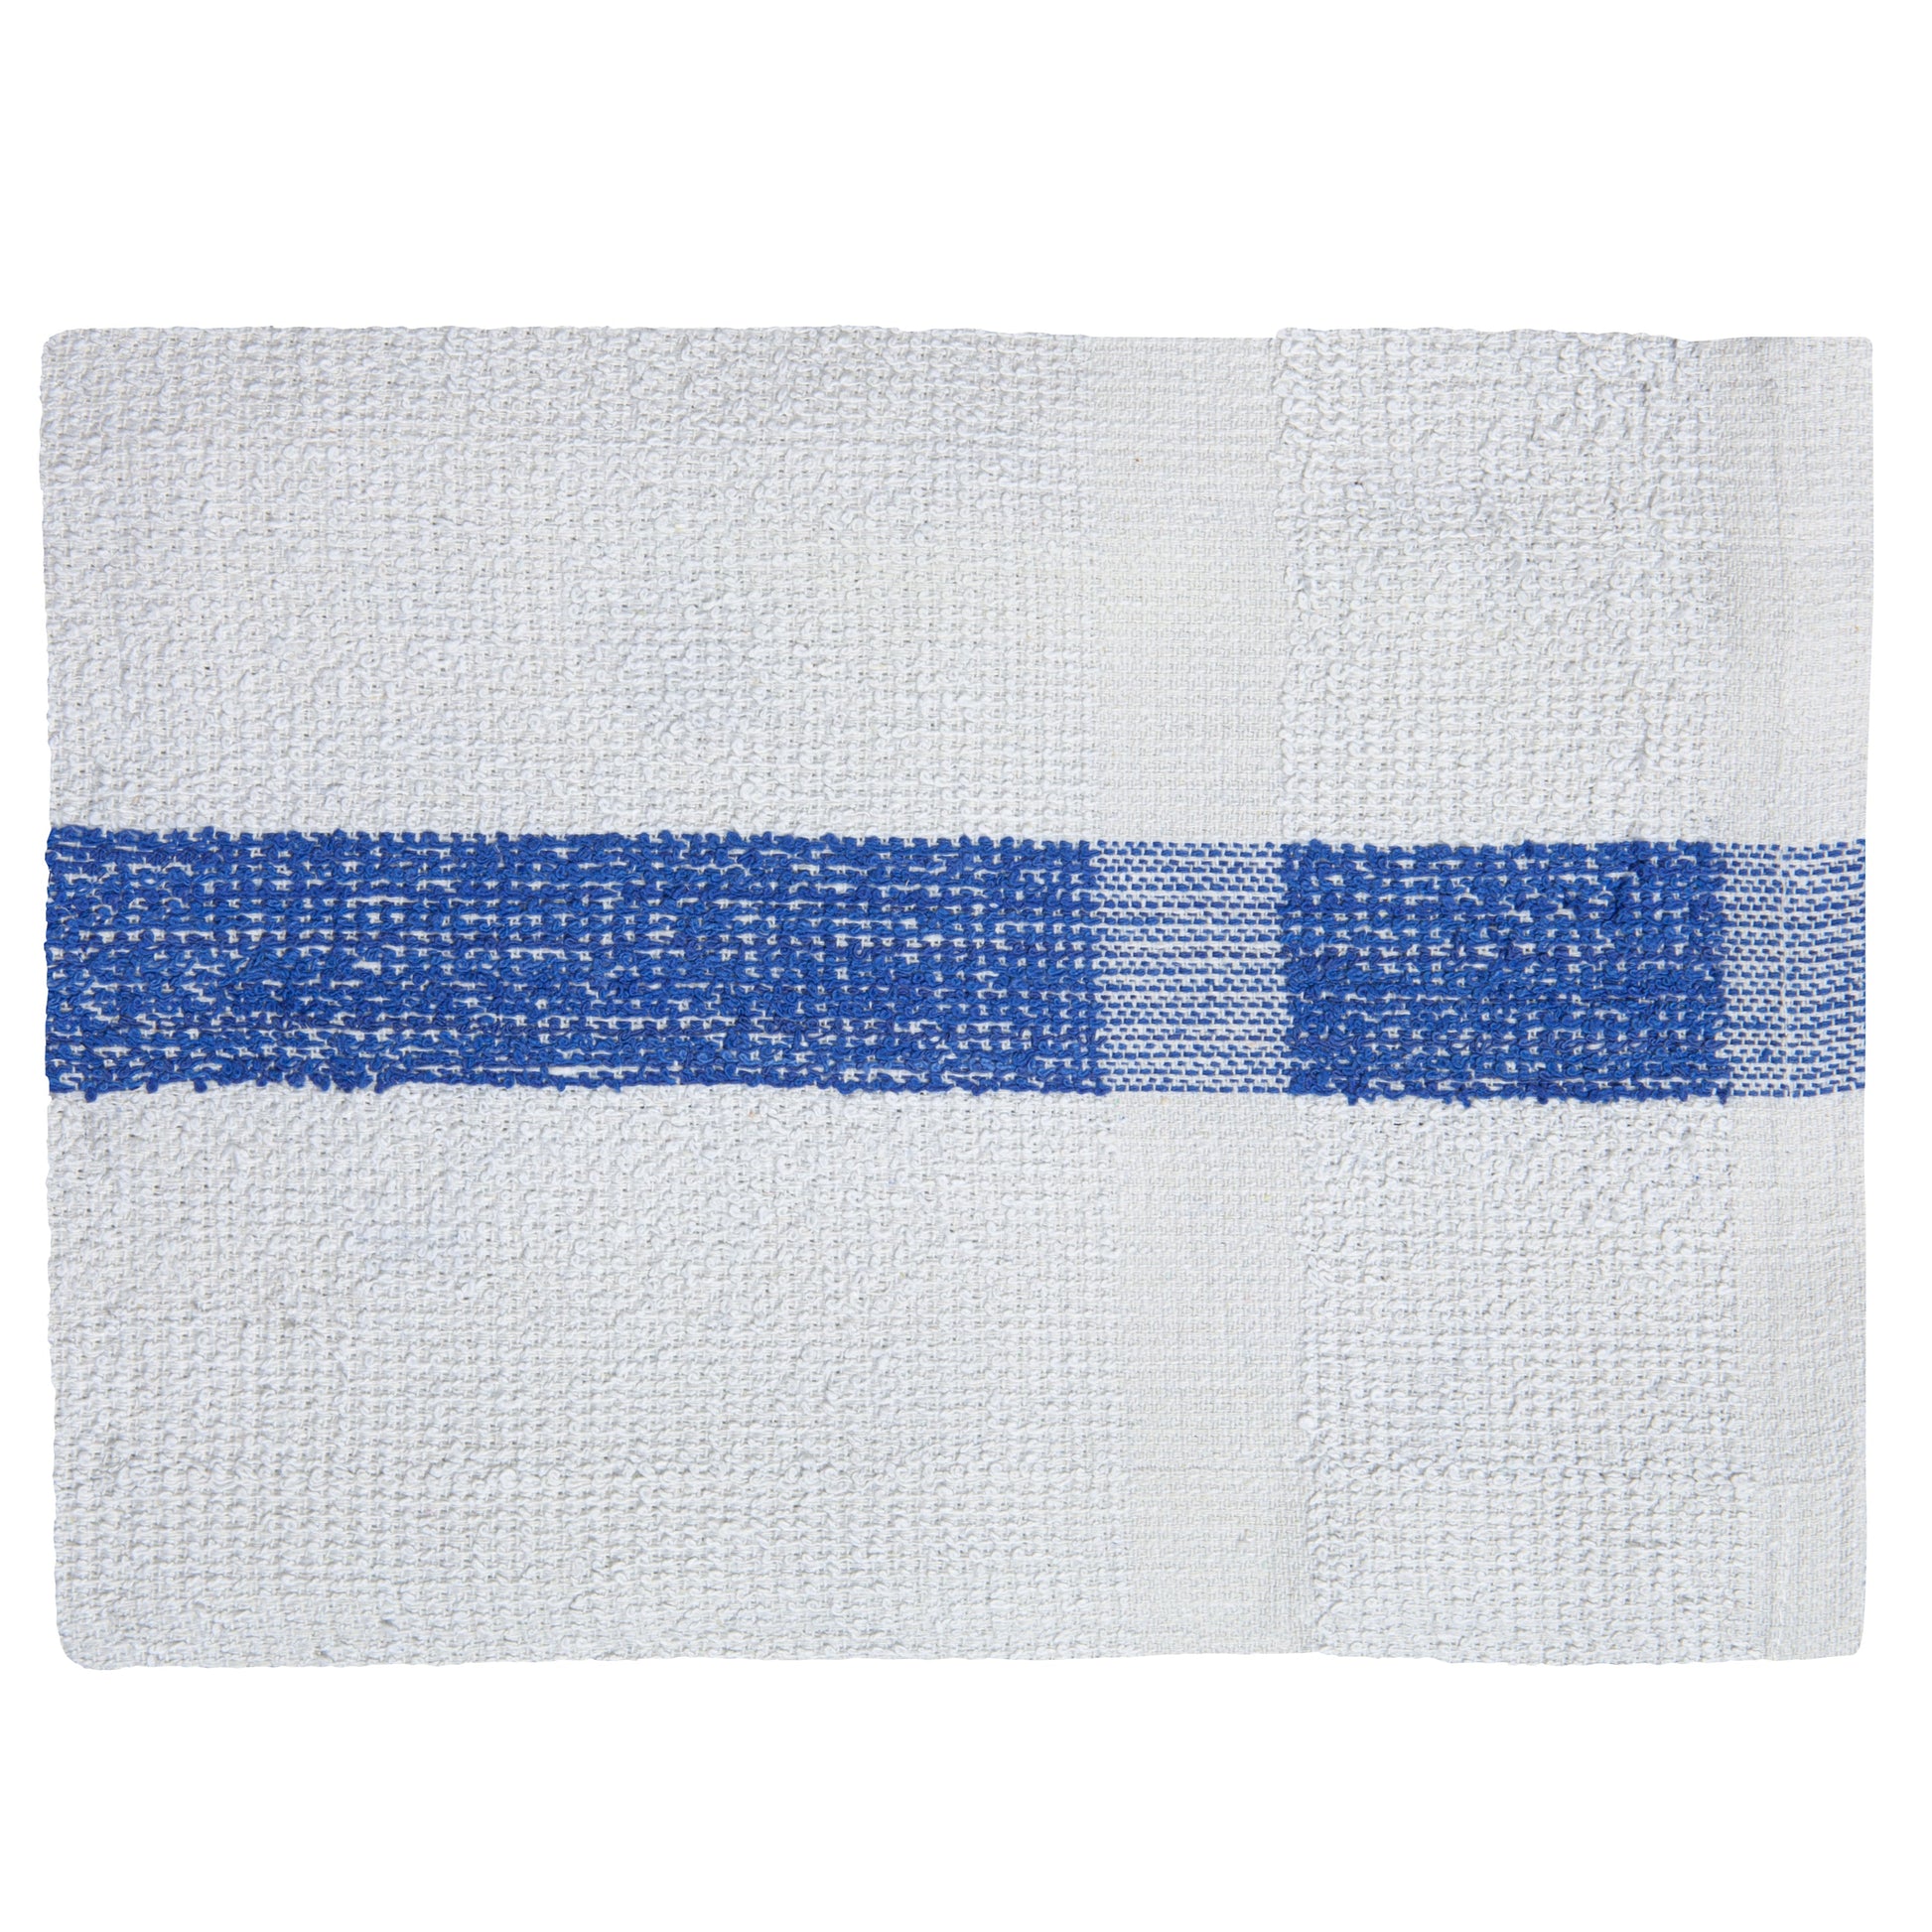 American Dawn | 20X40 Inch White With Blue Center Stripe And No Cam Healthcare Towel | Terry Towel